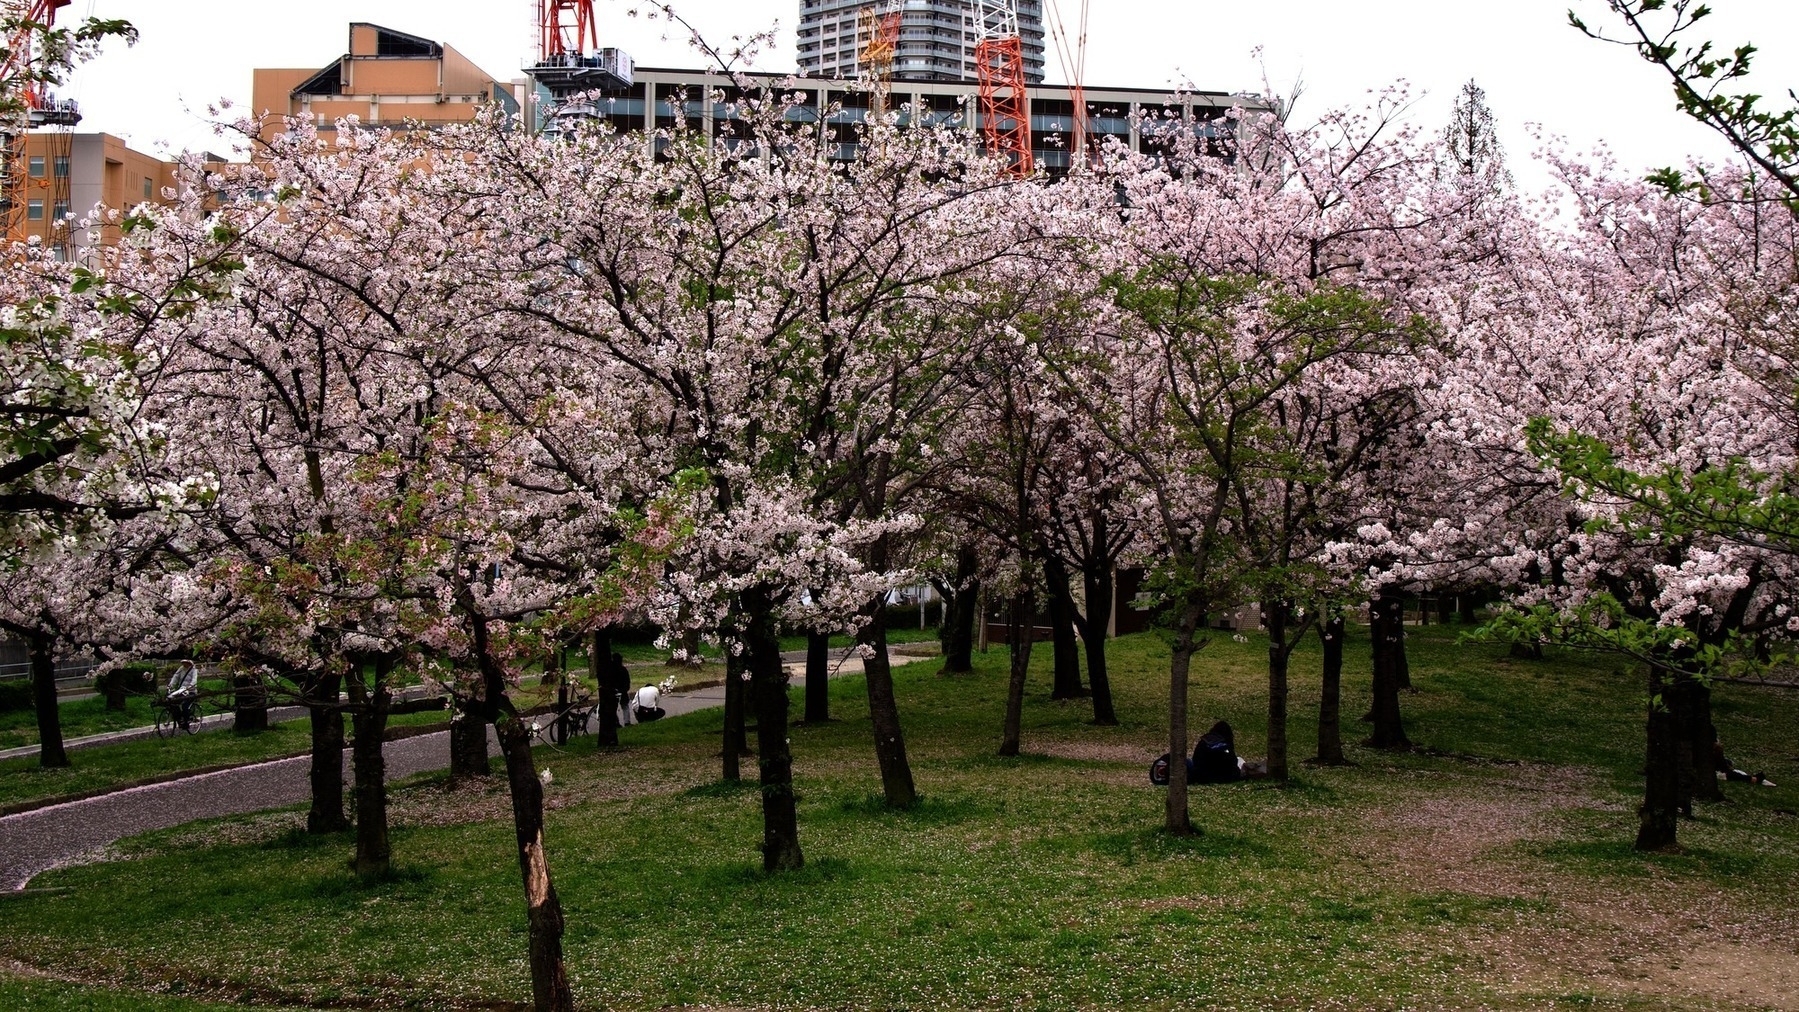 a park of sakura trees. Just beyond and above you can see a building and some cranes